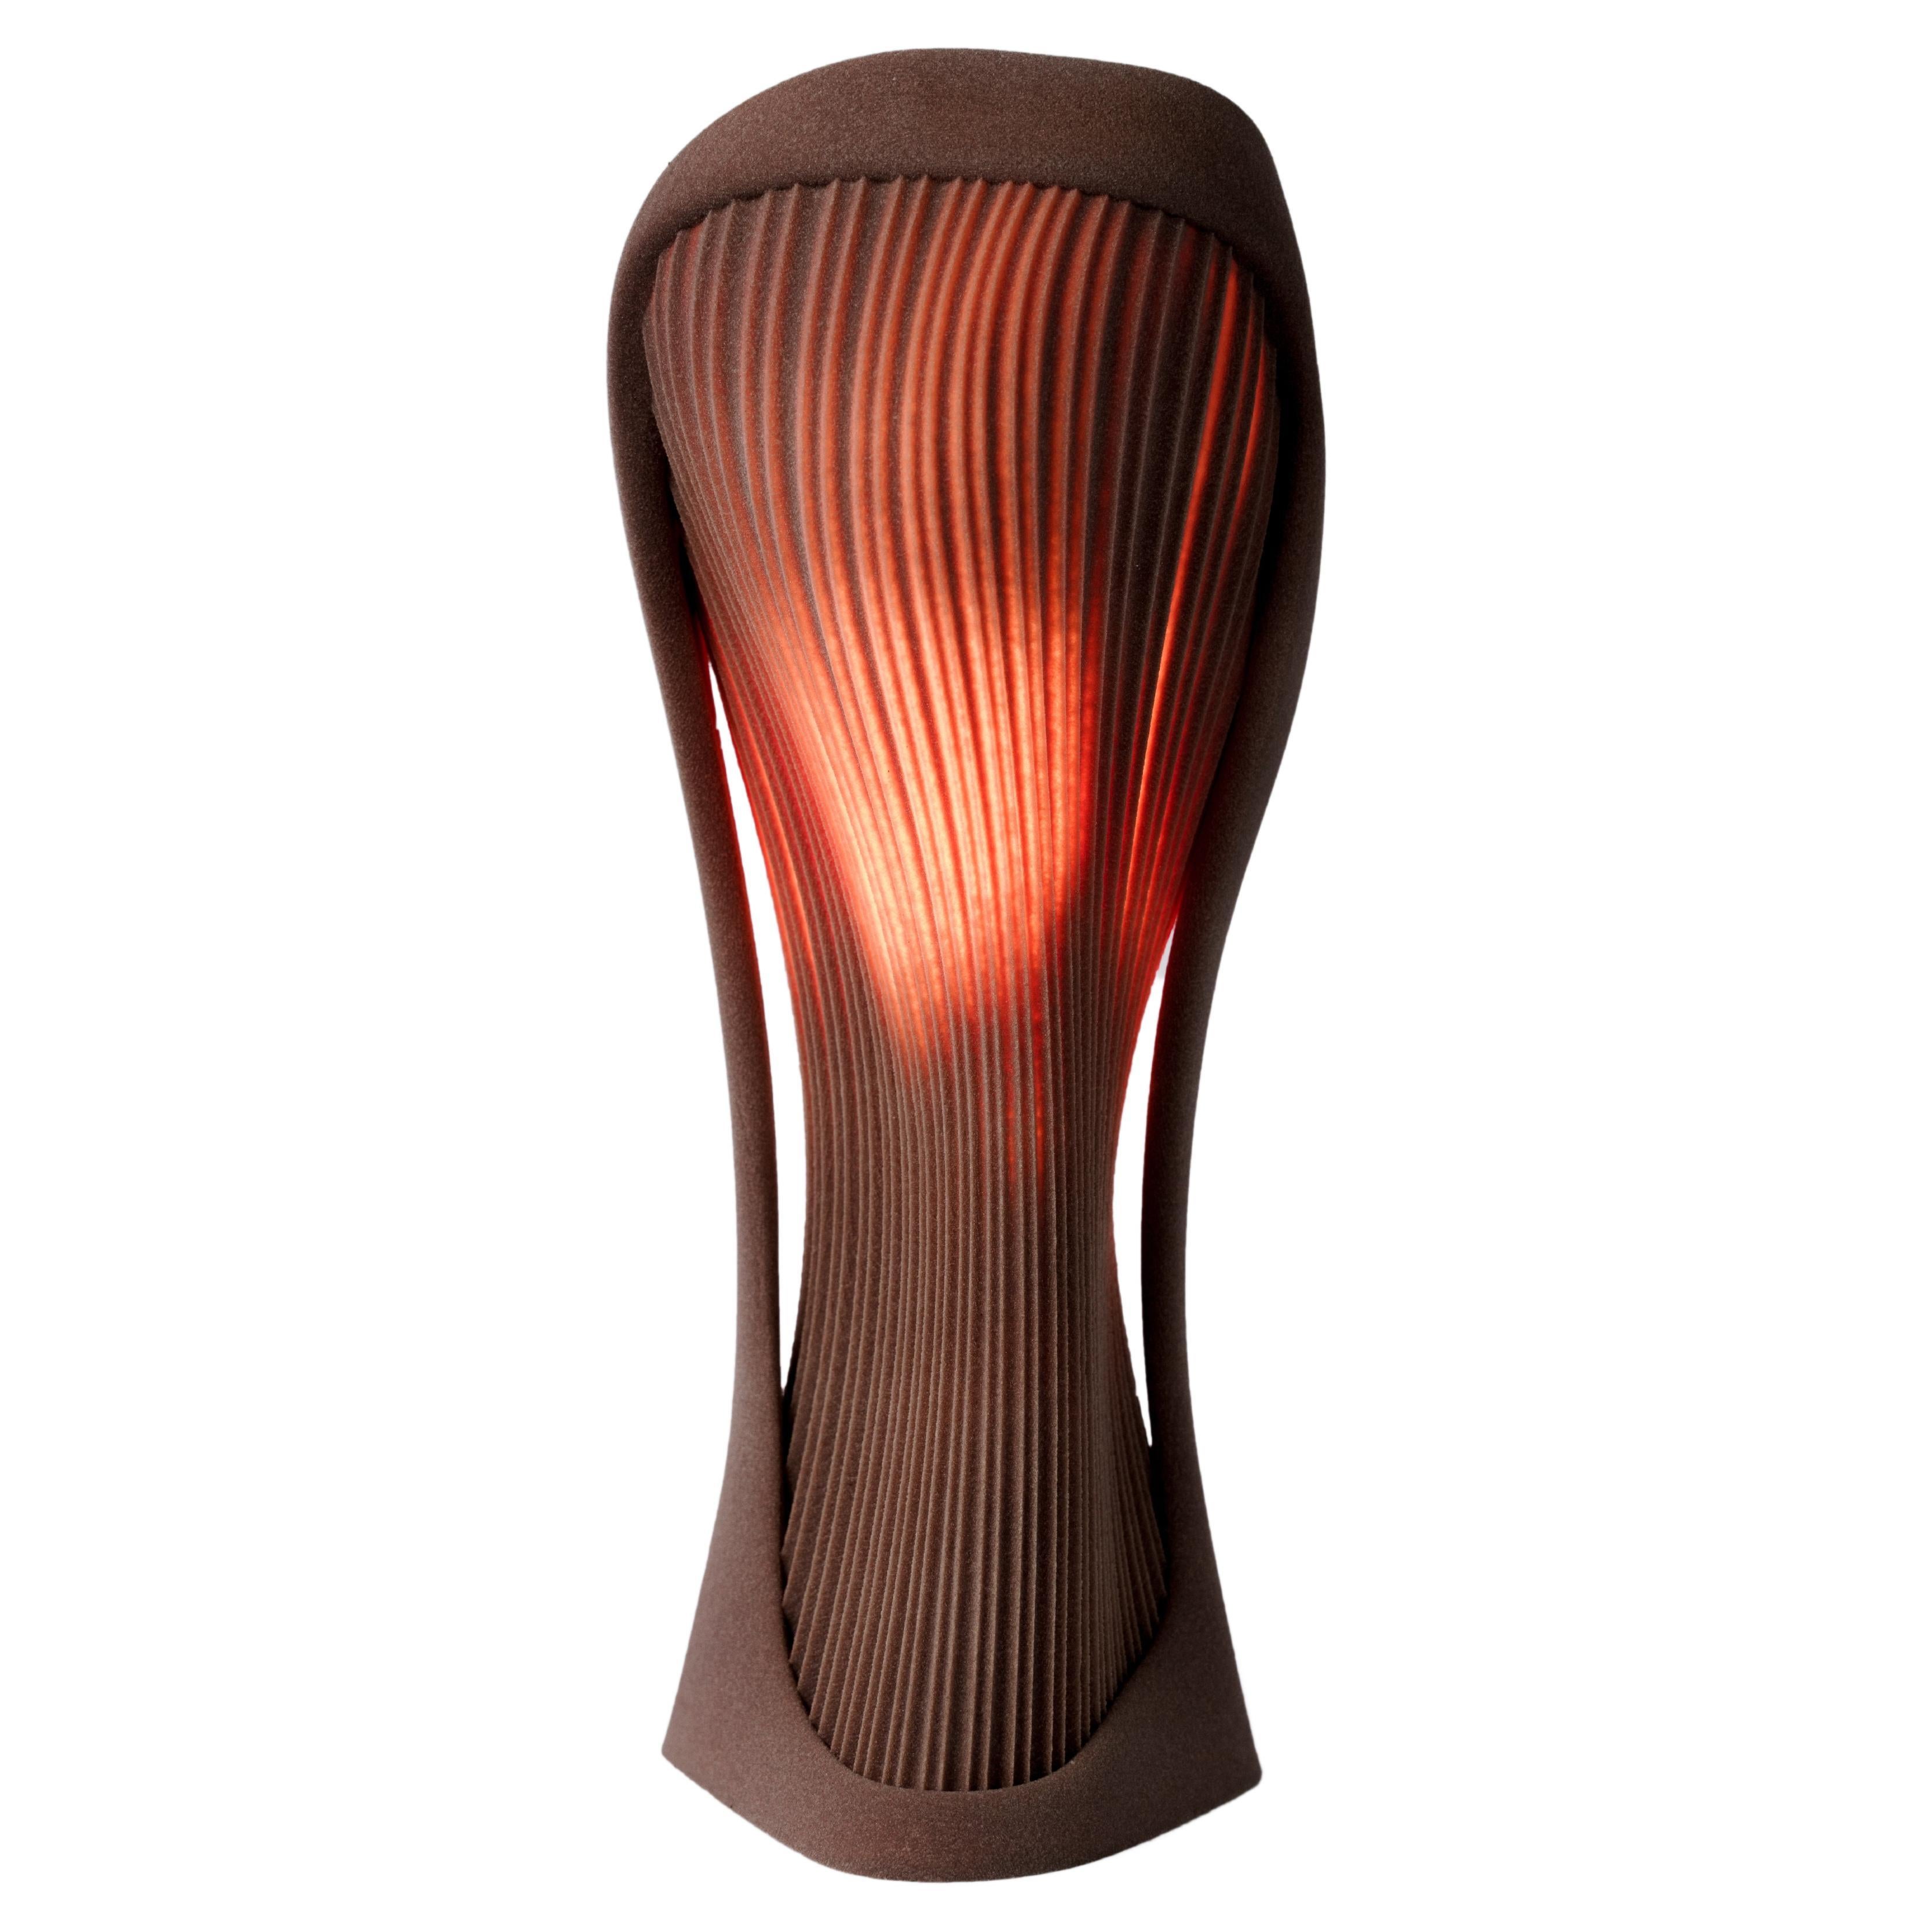 Dune Table Lamp, 3d-Printed Sand, Sculptural Organic, Unique Ambient Lighting For Sale